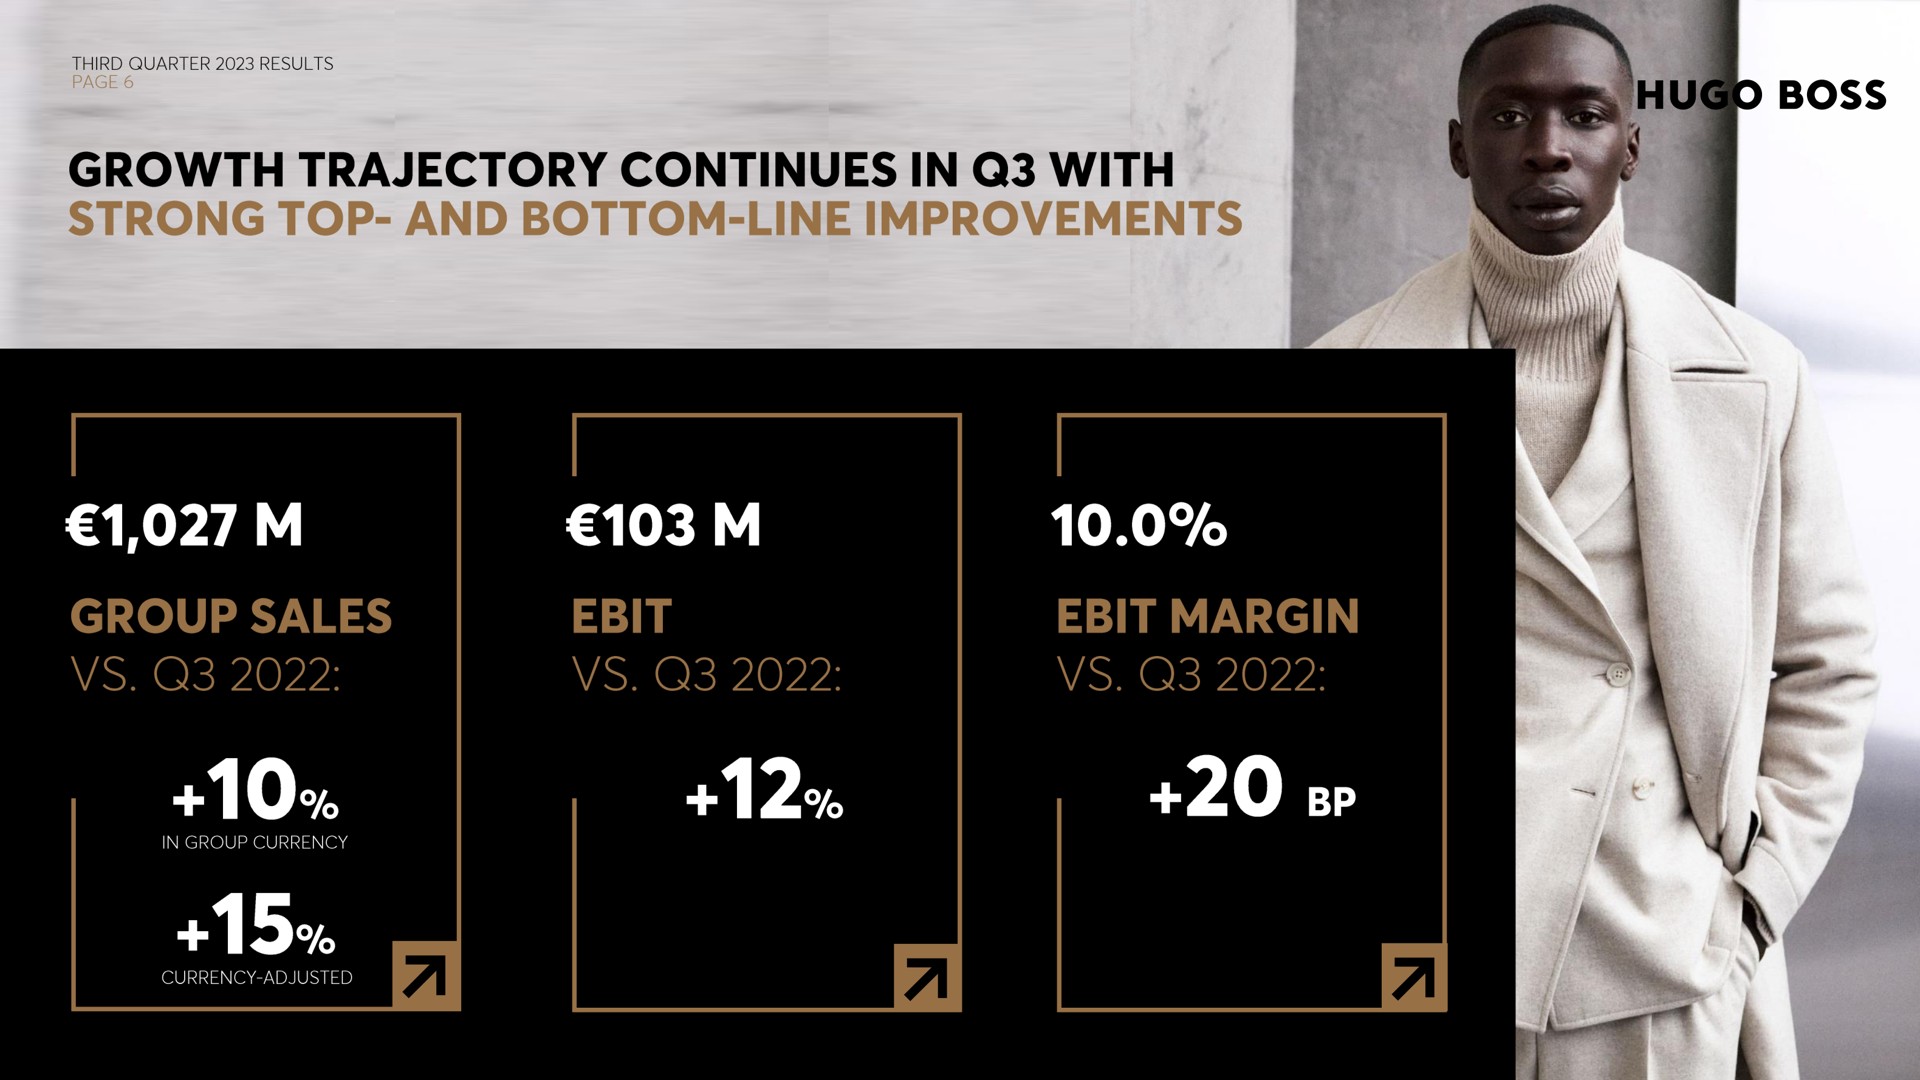 growth trajectory continues in with group sales a ere ale pad margin art | Hugo Boss